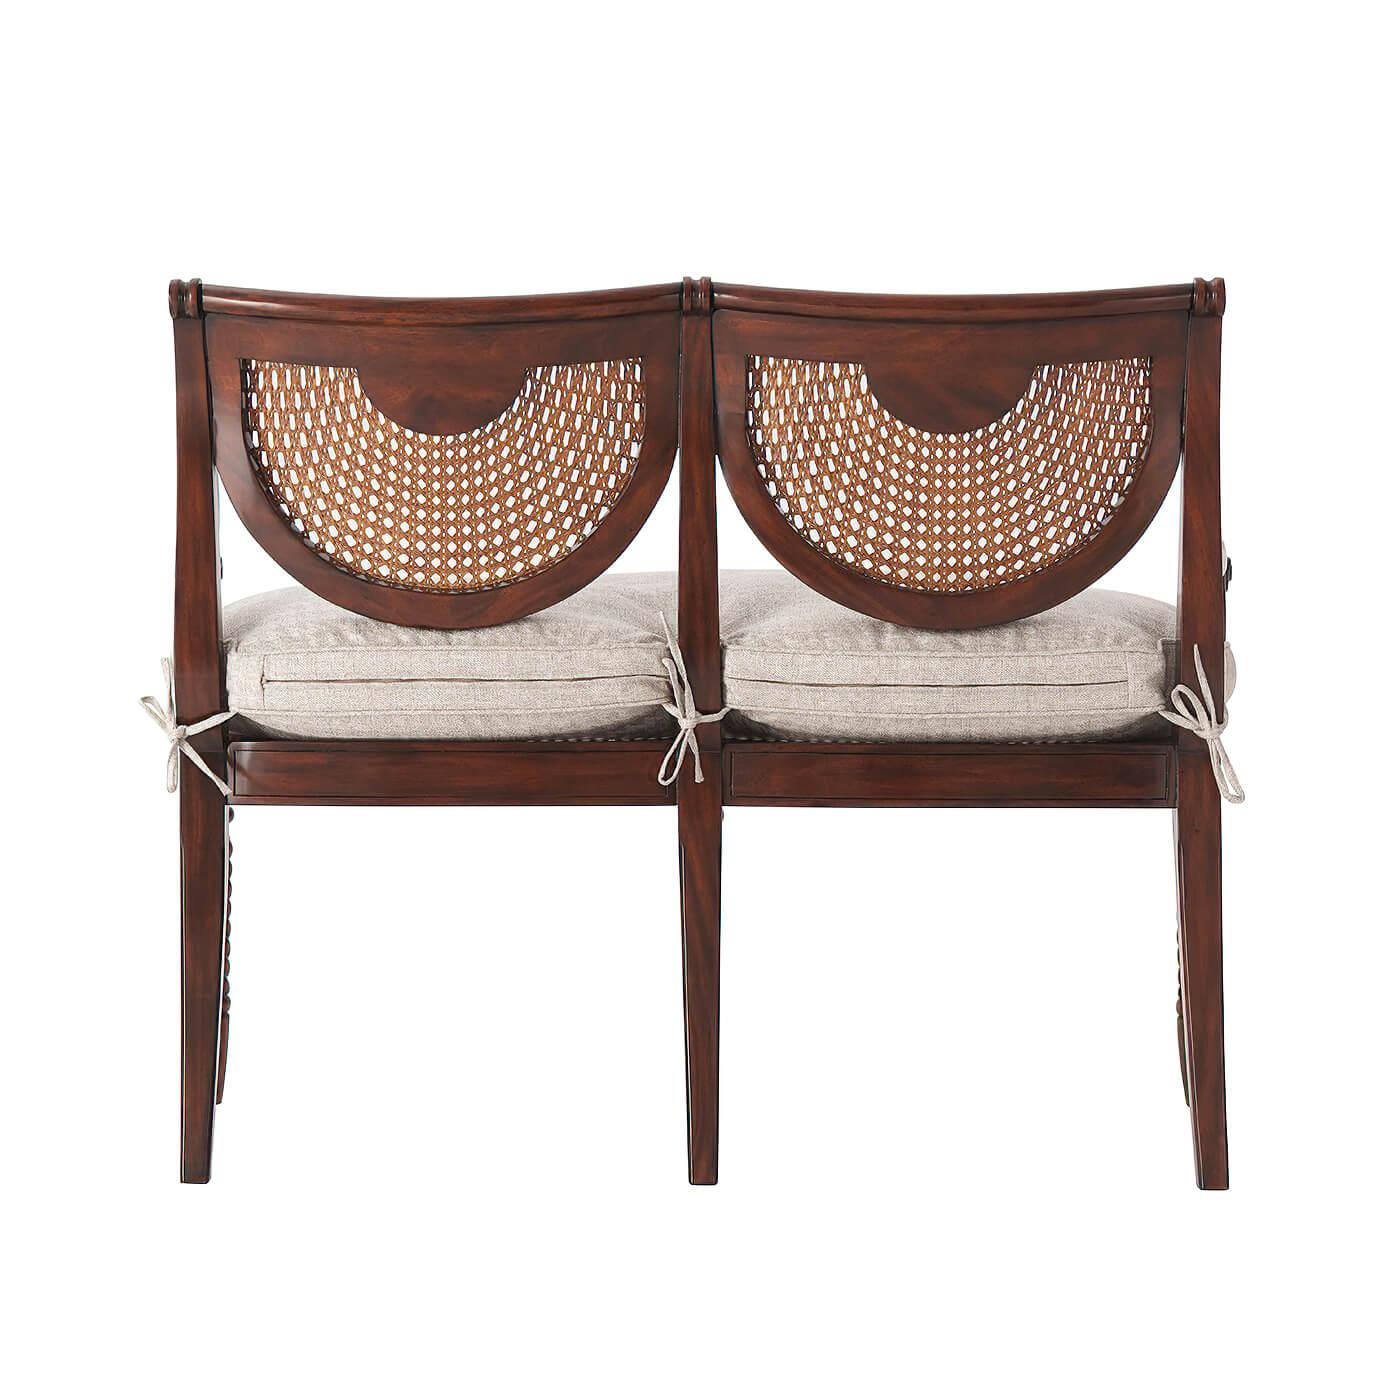 Contemporary Regency Double Chairback Settee For Sale